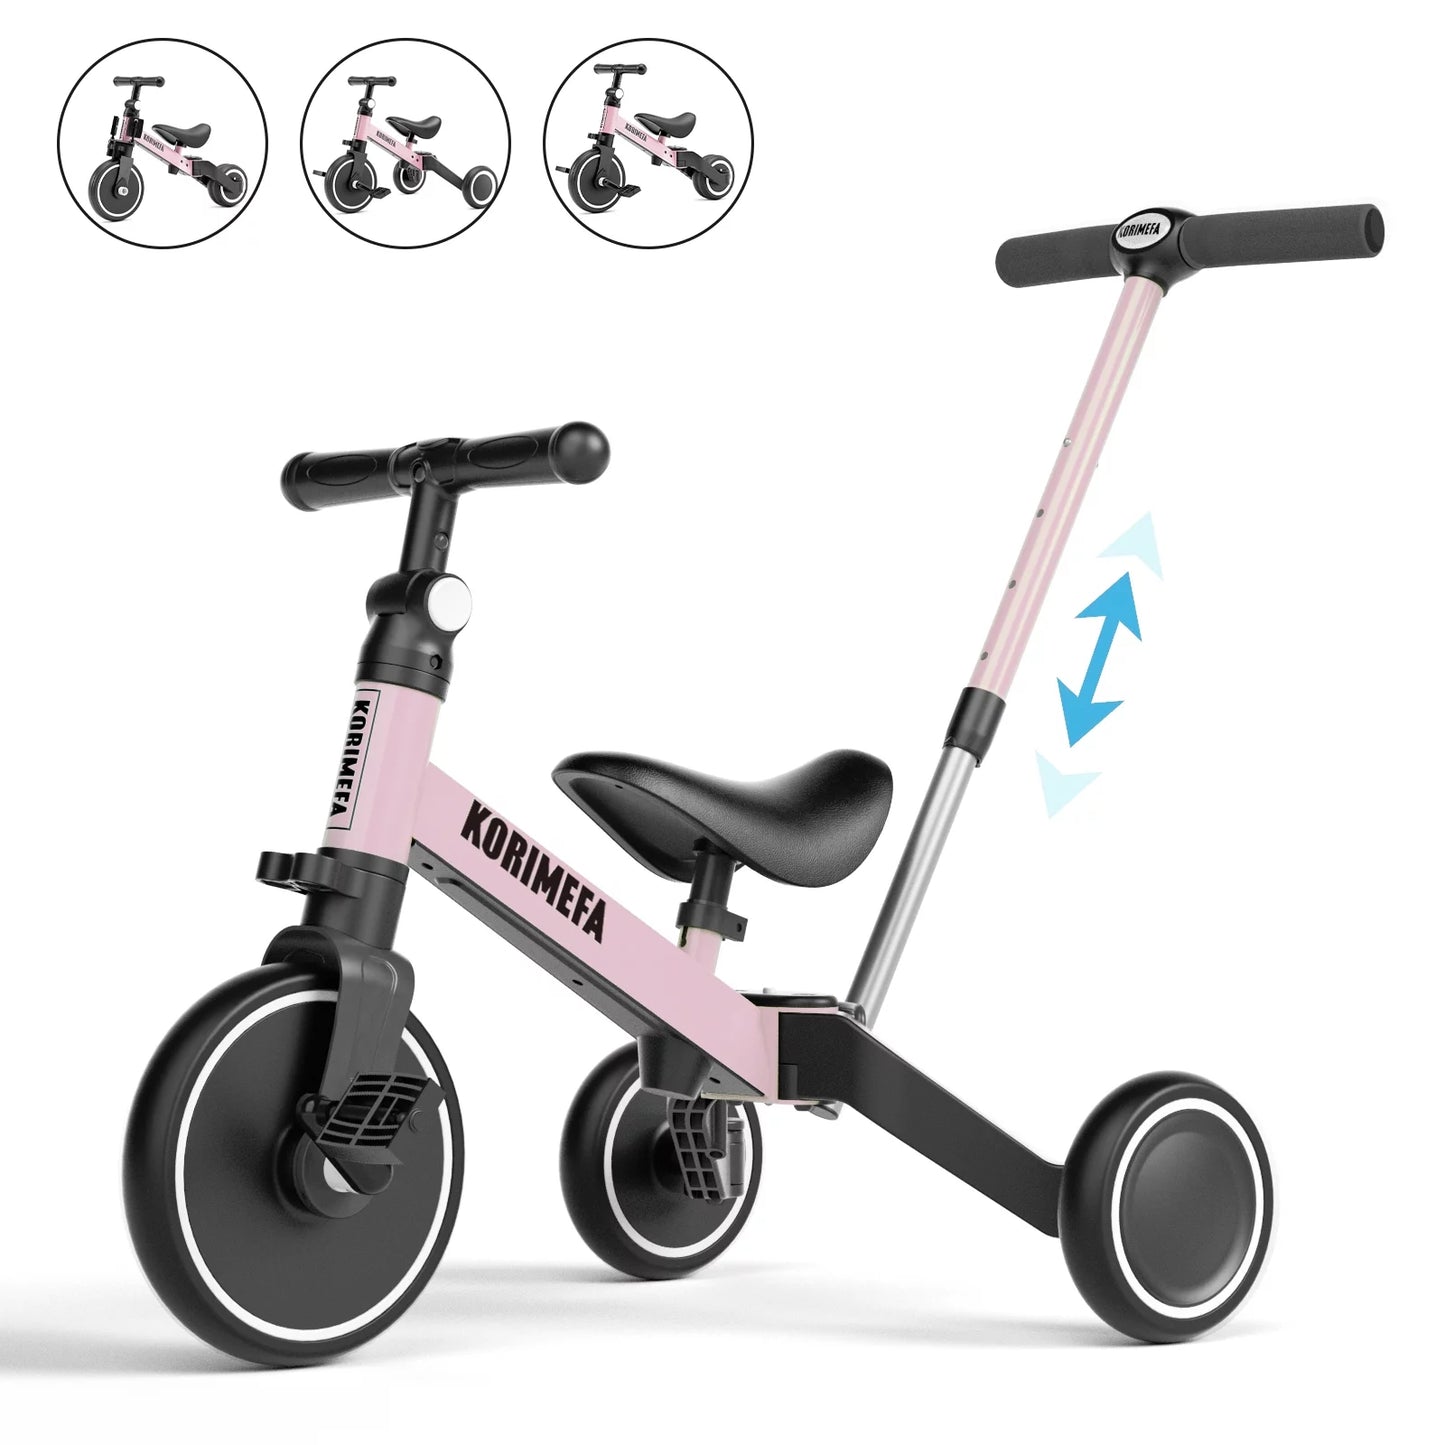 Toddler Bike with Push Handle,Tricycles for 1 to 3 Years Old, Toddler Tricycle with Push Handle for Boy Girl, Baby Bike Balance Bike